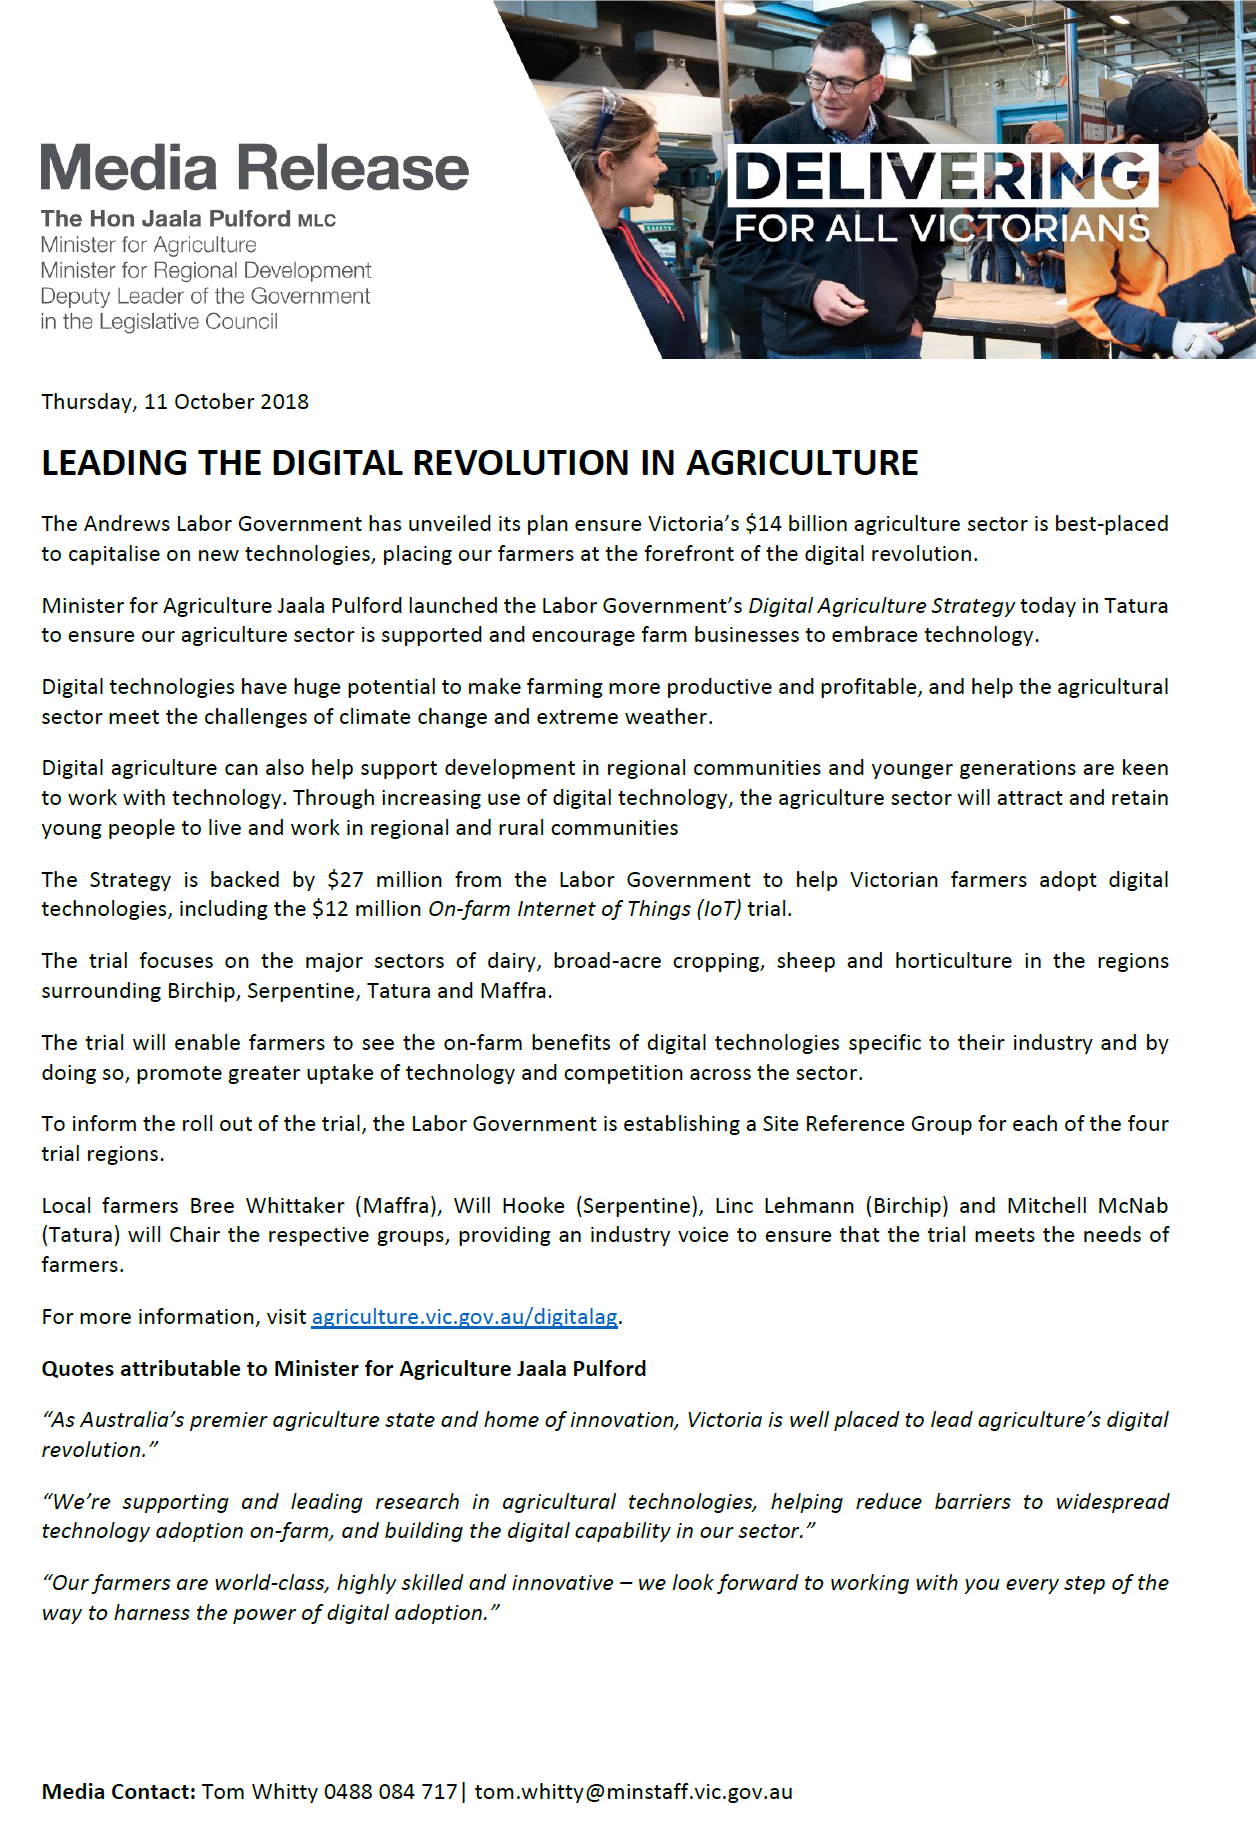 Media Release- Leading the Digital Revolution in Agriculture